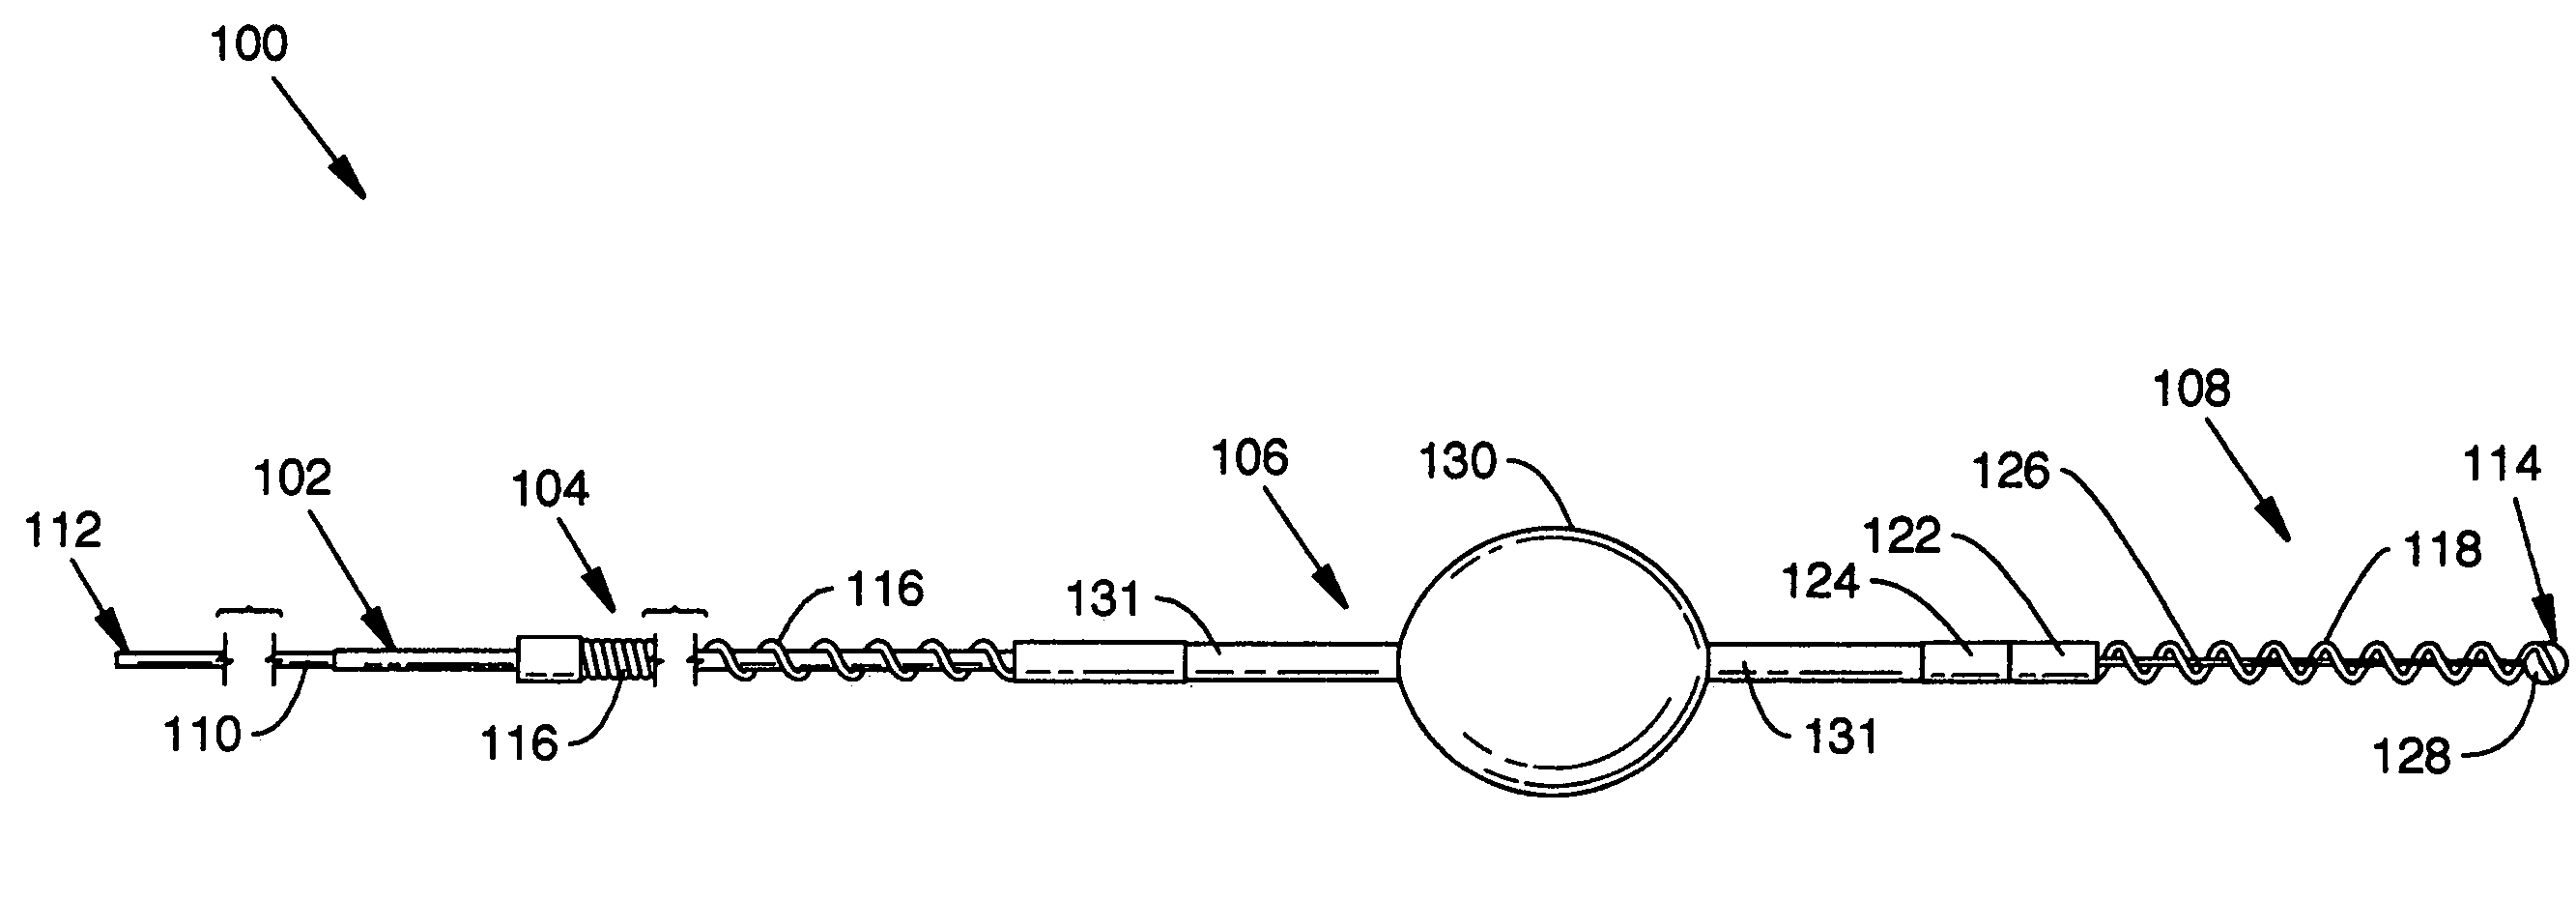 Guidewire assembly including a repeatably inflatable occlusive balloon on a guidewire ensheathed with a spiral coil